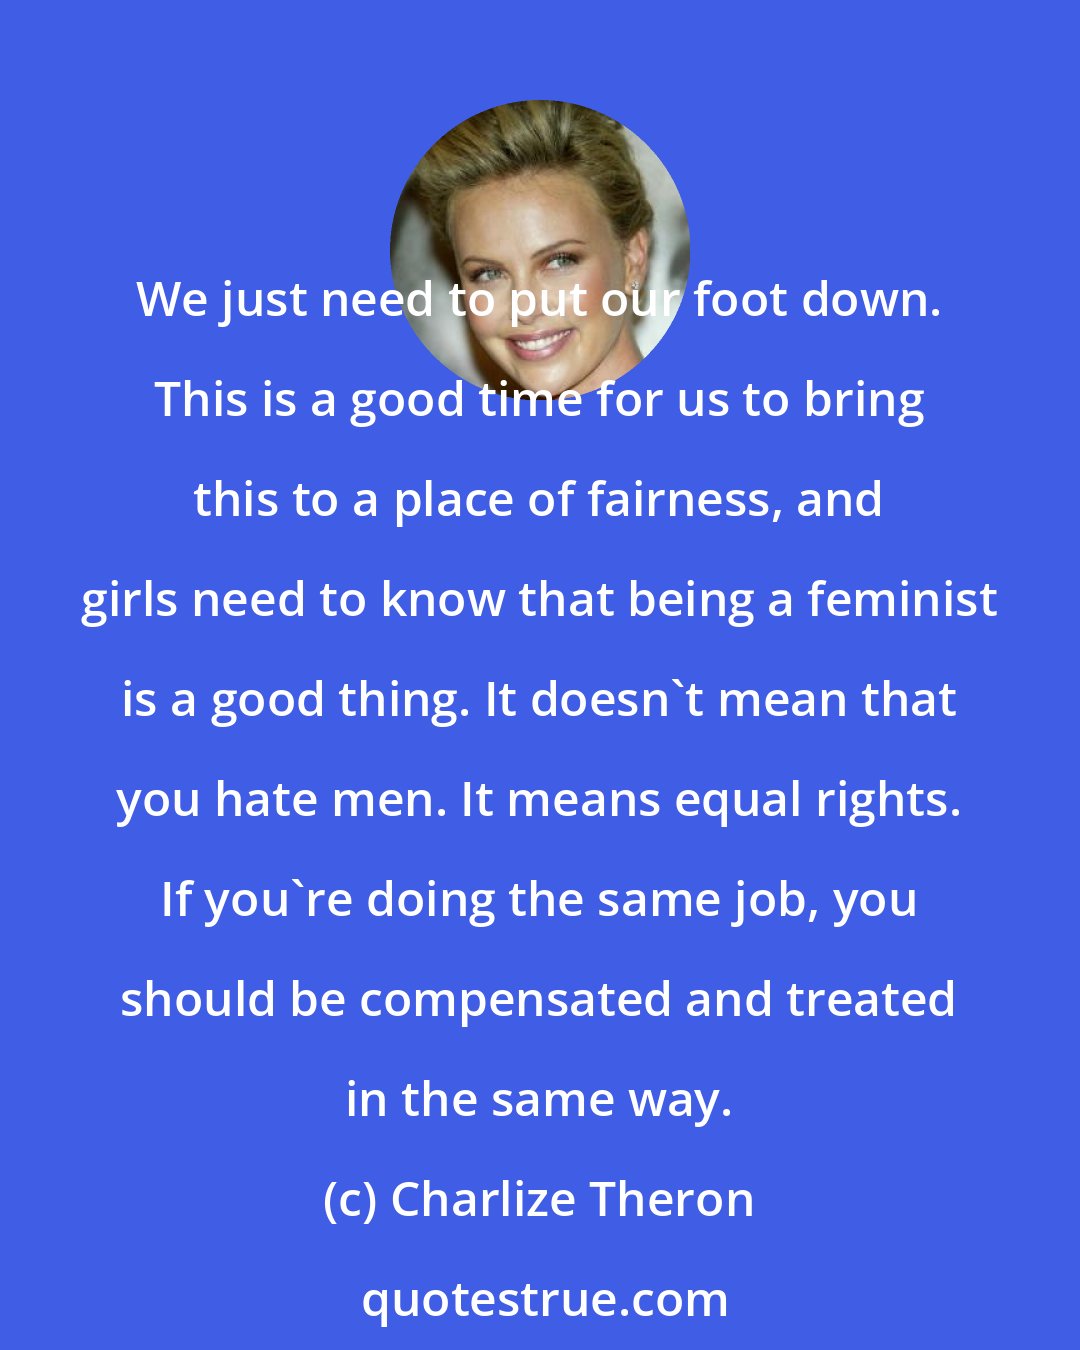 Charlize Theron: We just need to put our foot down. This is a good time for us to bring this to a place of fairness, and girls need to know that being a feminist is a good thing. It doesn't mean that you hate men. It means equal rights. If you're doing the same job, you should be compensated and treated in the same way.